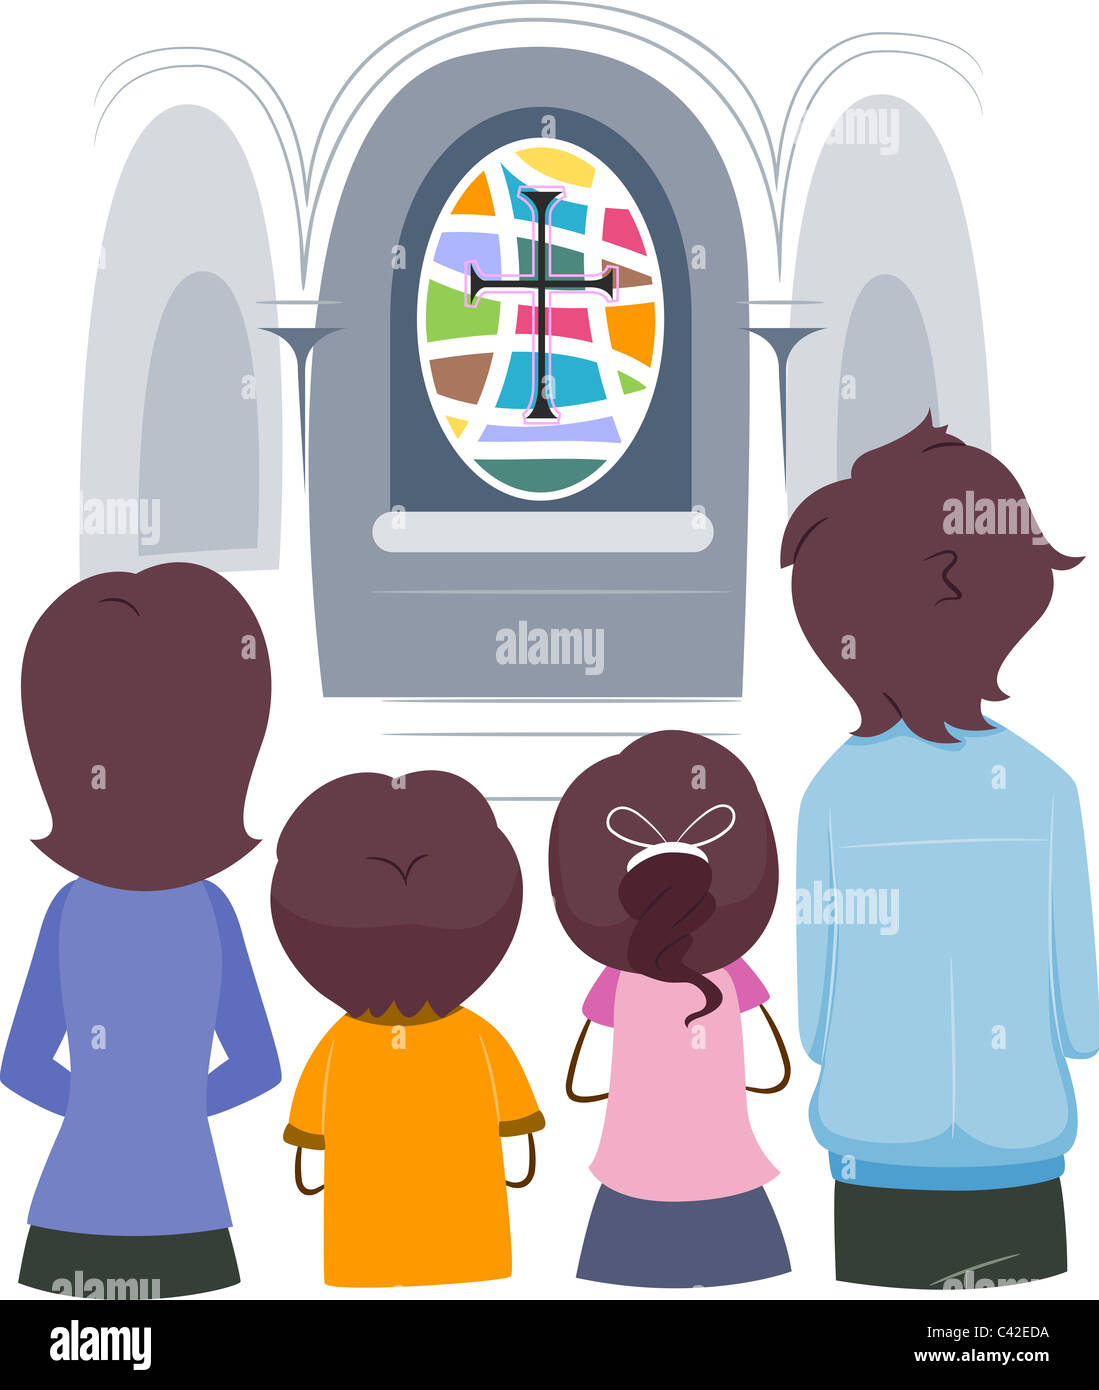 Illustration of a Christian Family Praying Together Stock Photo